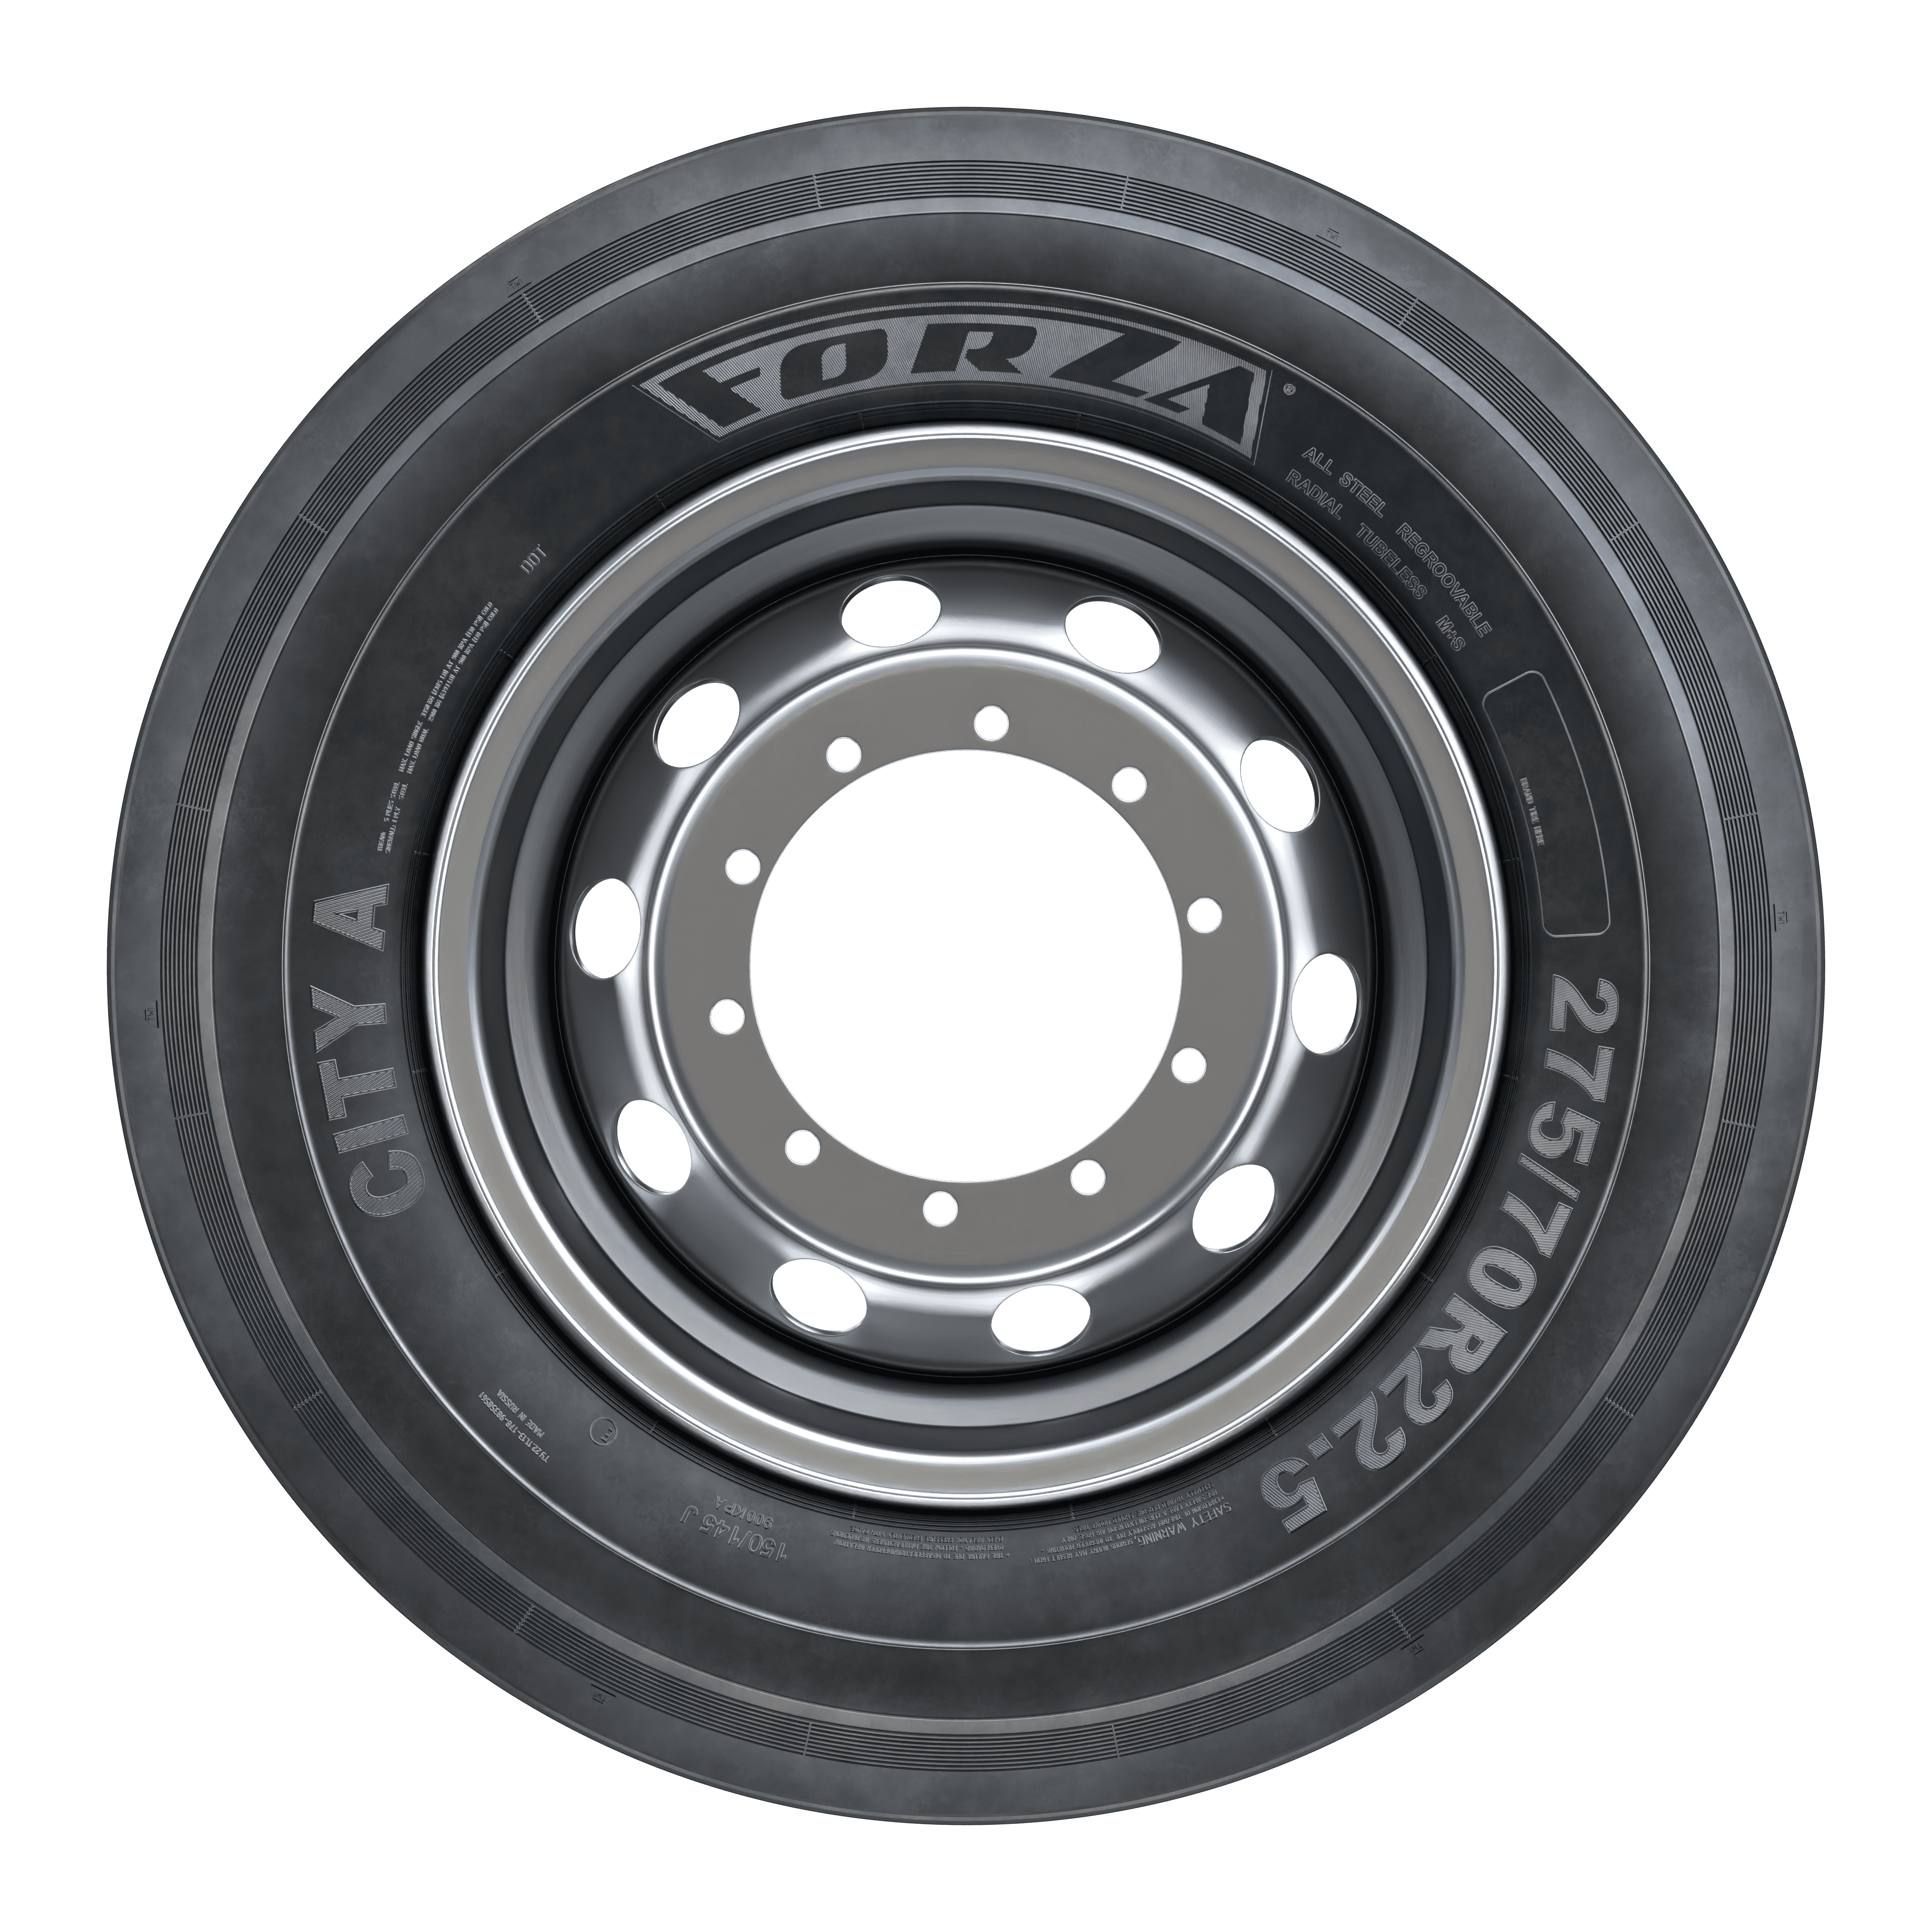 275/70r22.5 Кама Forza City a. Кама Форза 385 65 22.5. Кама Forza Mix a 11x22,5. Грузовые шины Форза.